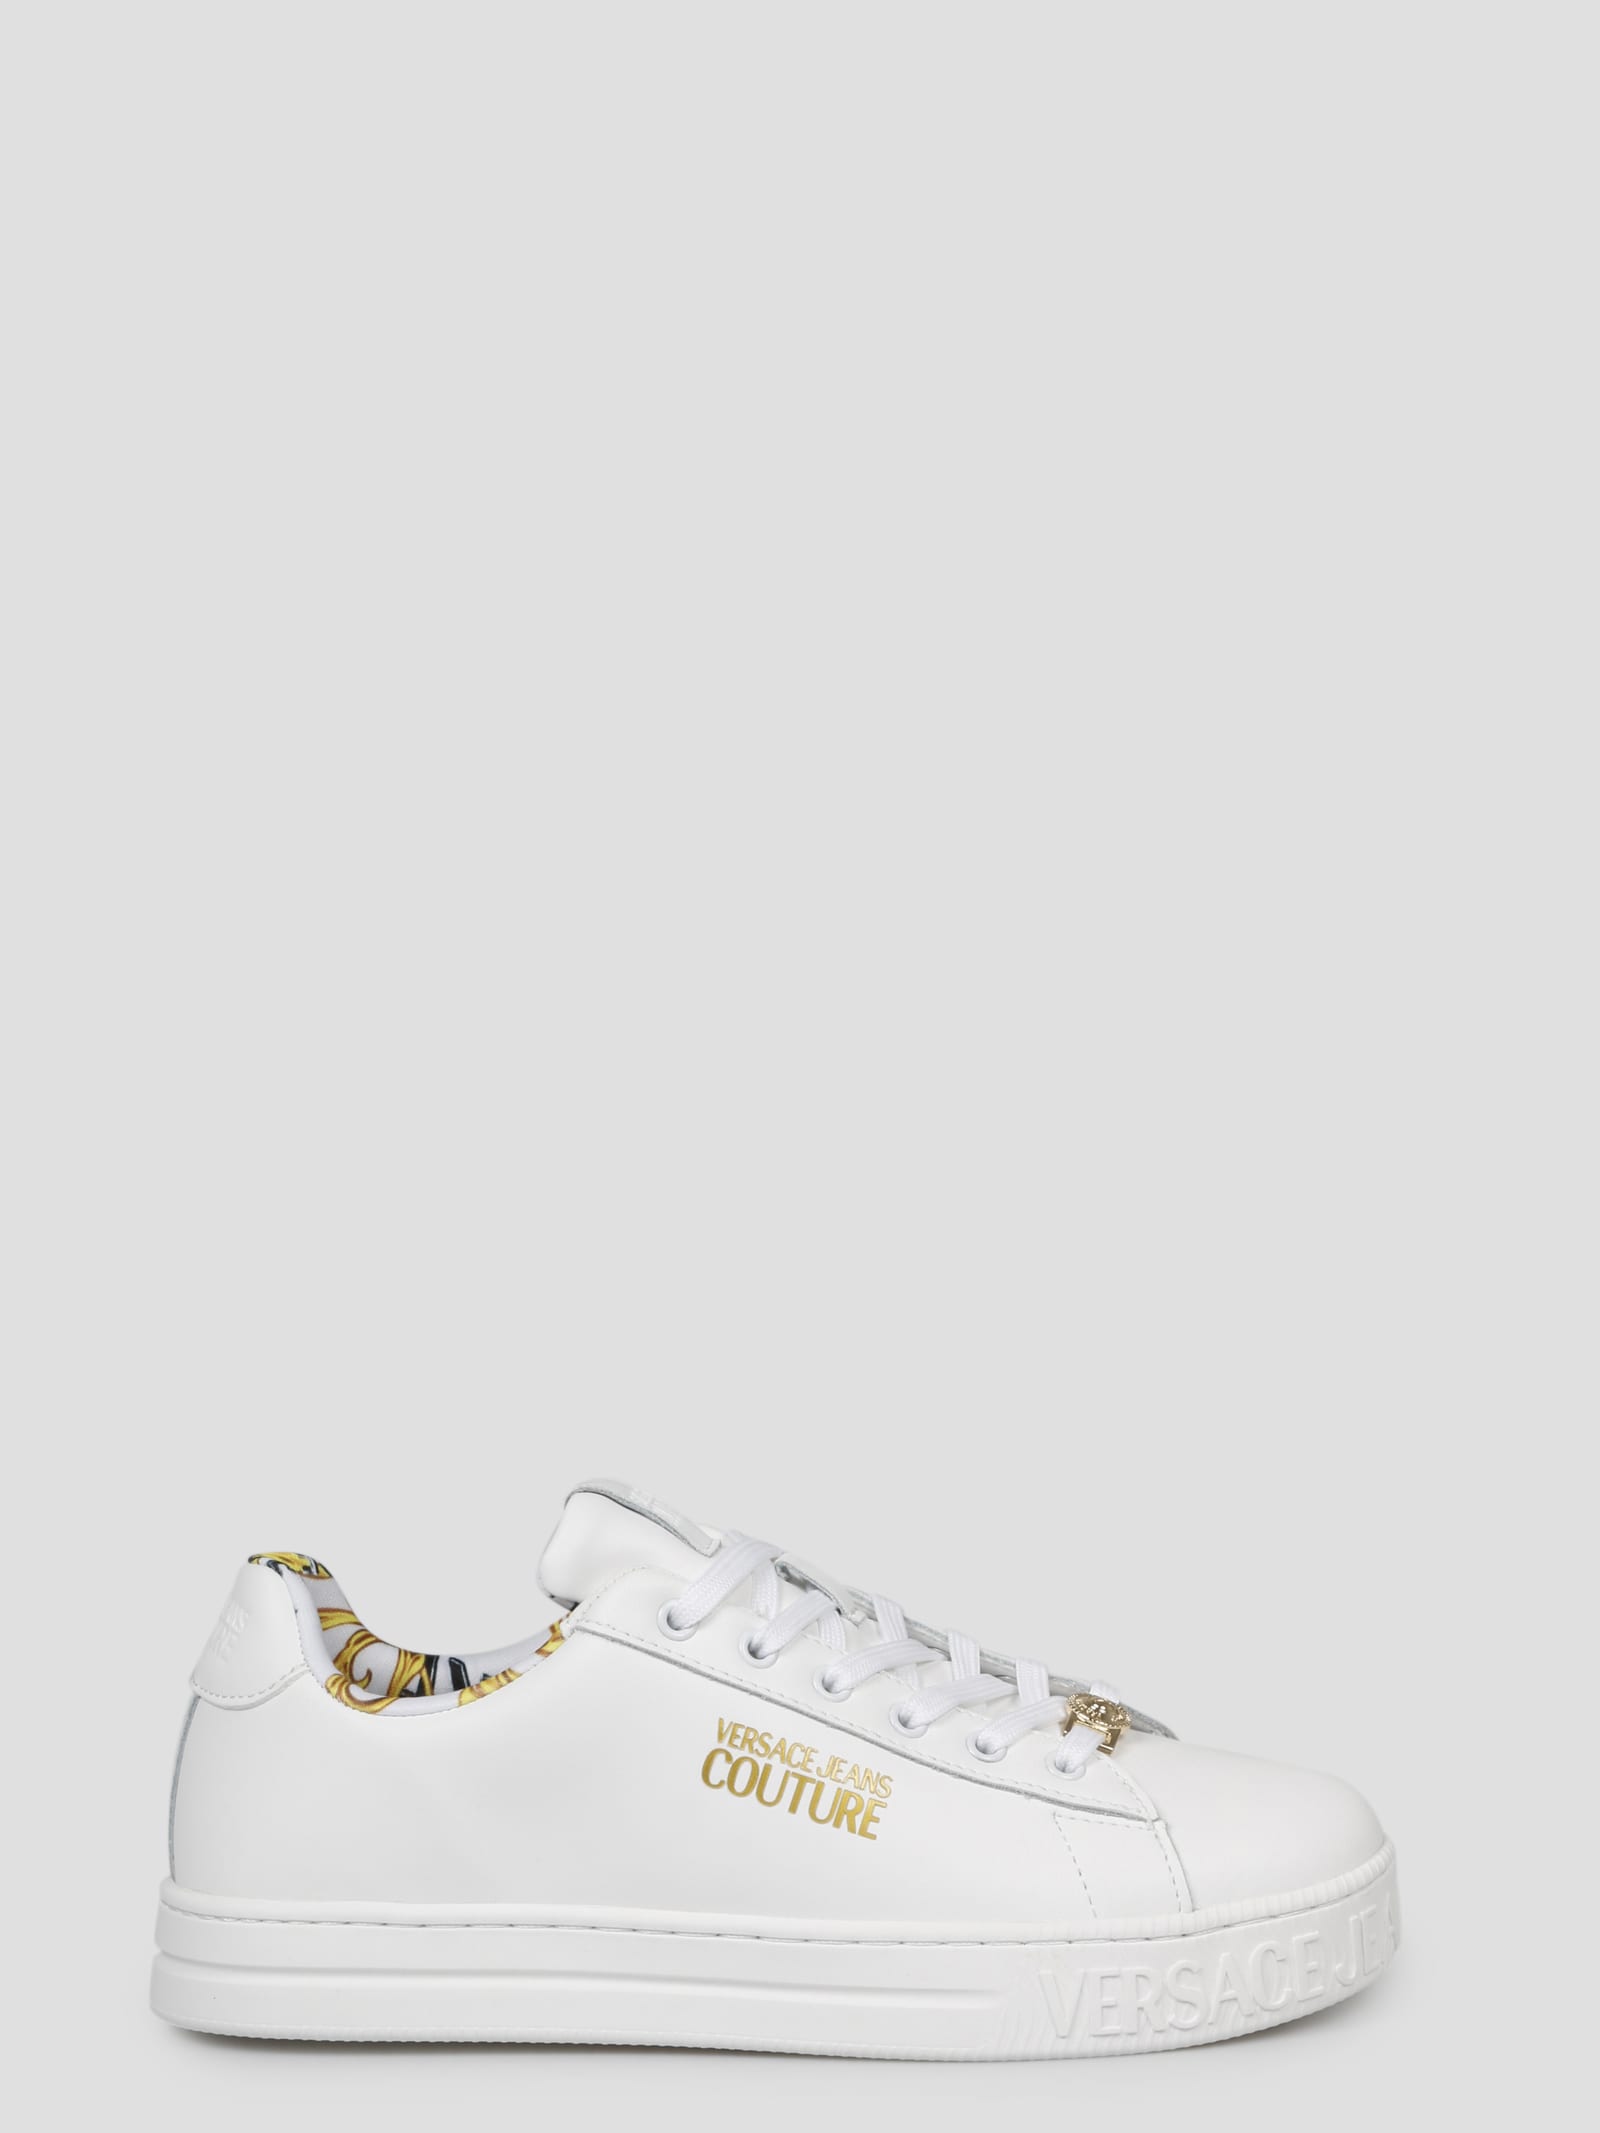 VERSACE JEANS COUTURE COURT 88 LOGO COUTURE SNEAKERS